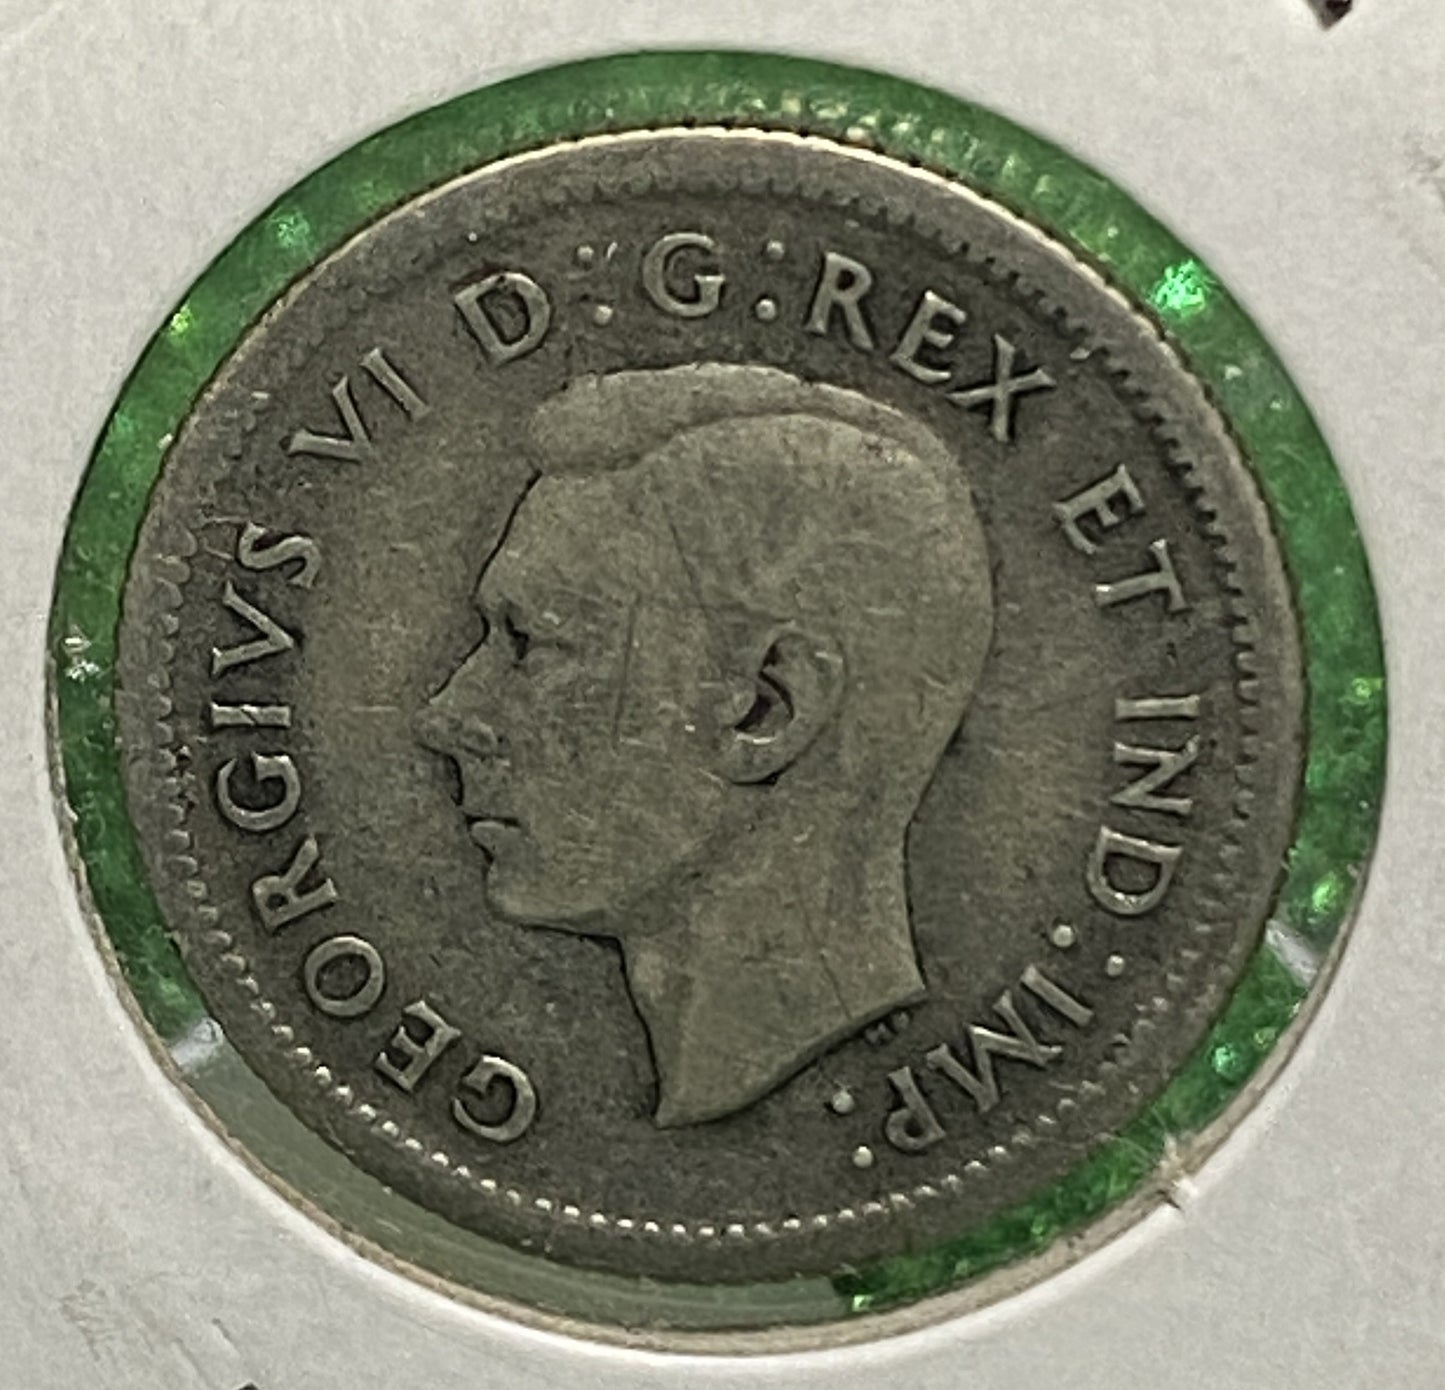 CANADIAN 1938 DIME 10 CENTS SILVER COIN KING GEORGE VI (G / VG)